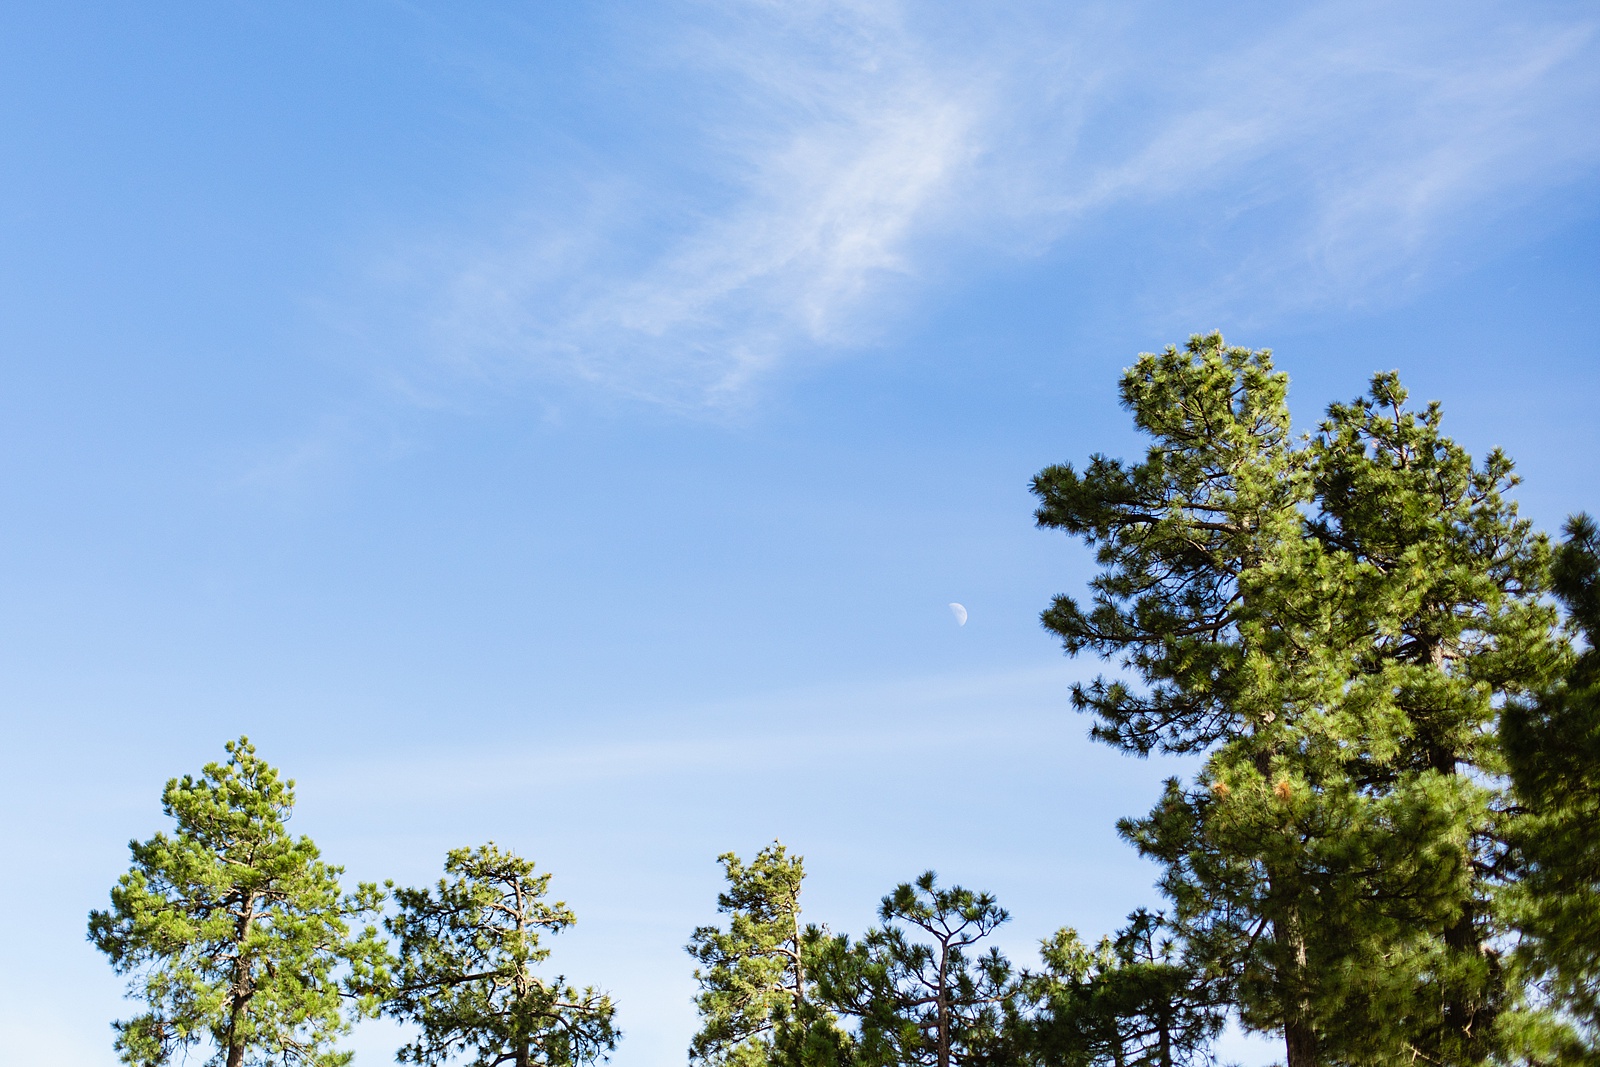 Moon phase in the sky at wedding ceremony location at Mogollon Rim by Arizona elopement photographer Juniper and Co Photography.